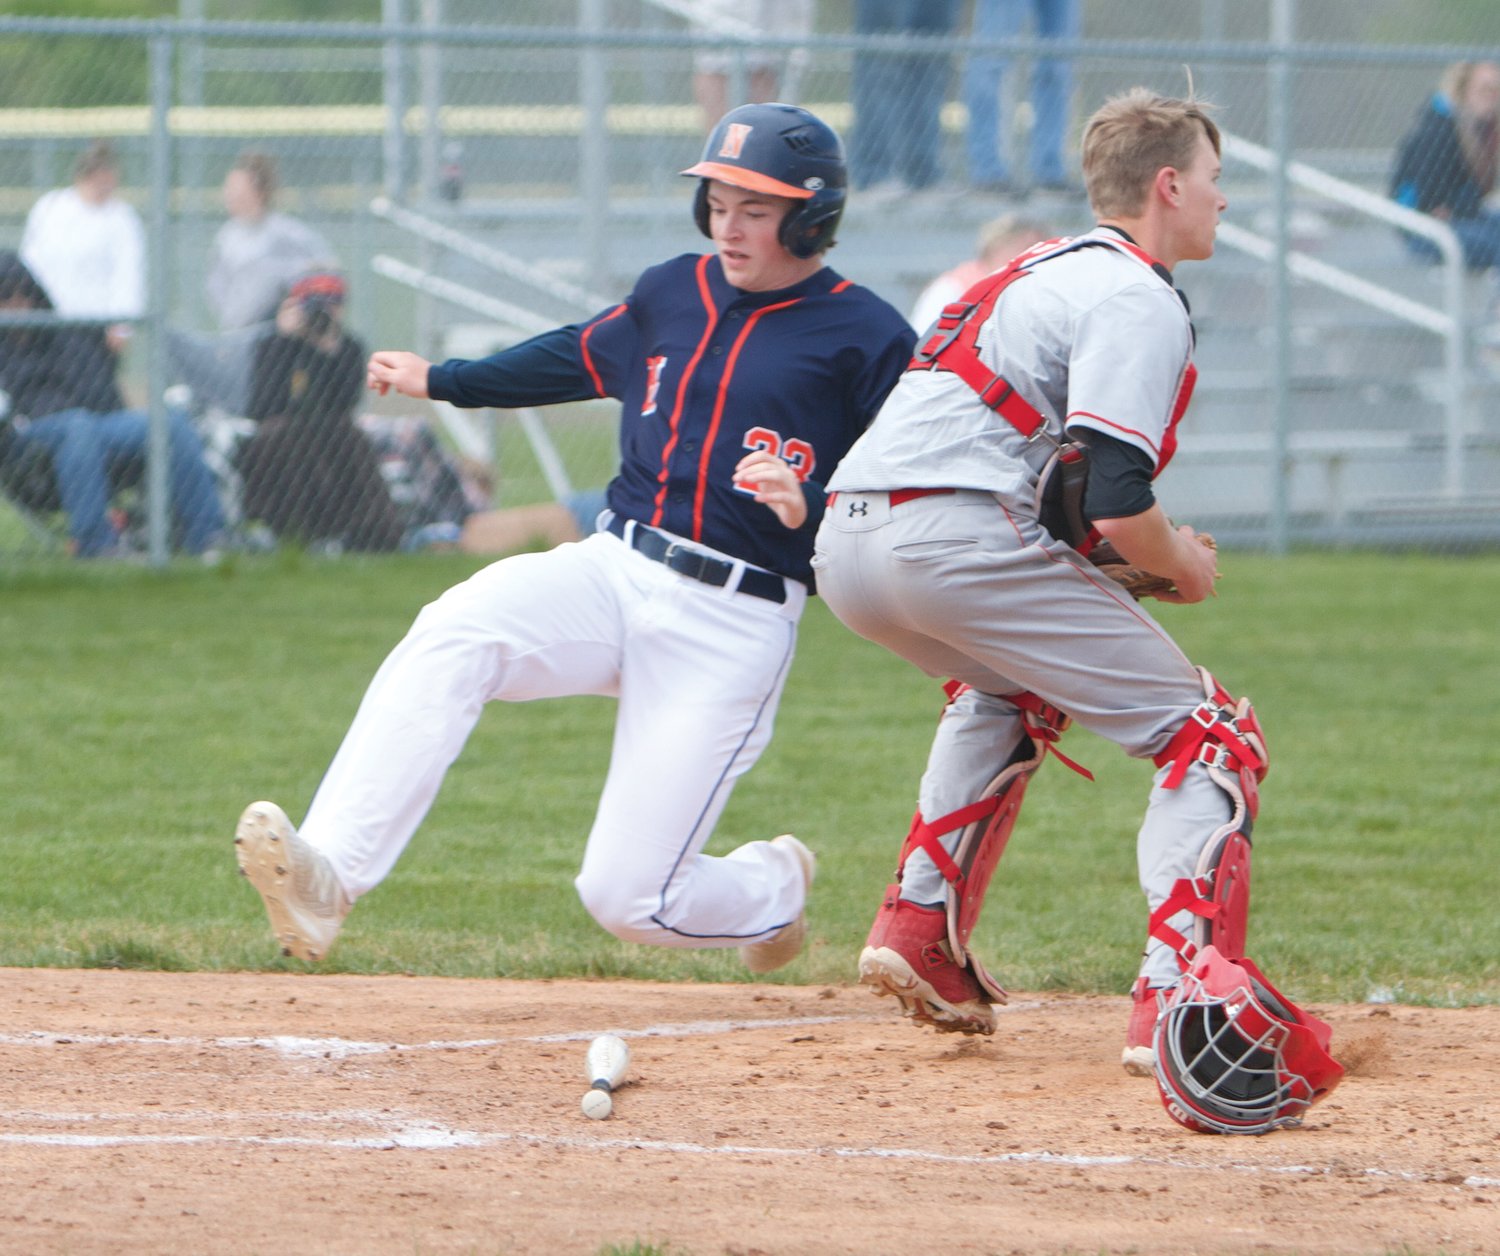 North Montgomery's Brookes Walters slides into the home plate on Saturday at Southmont.